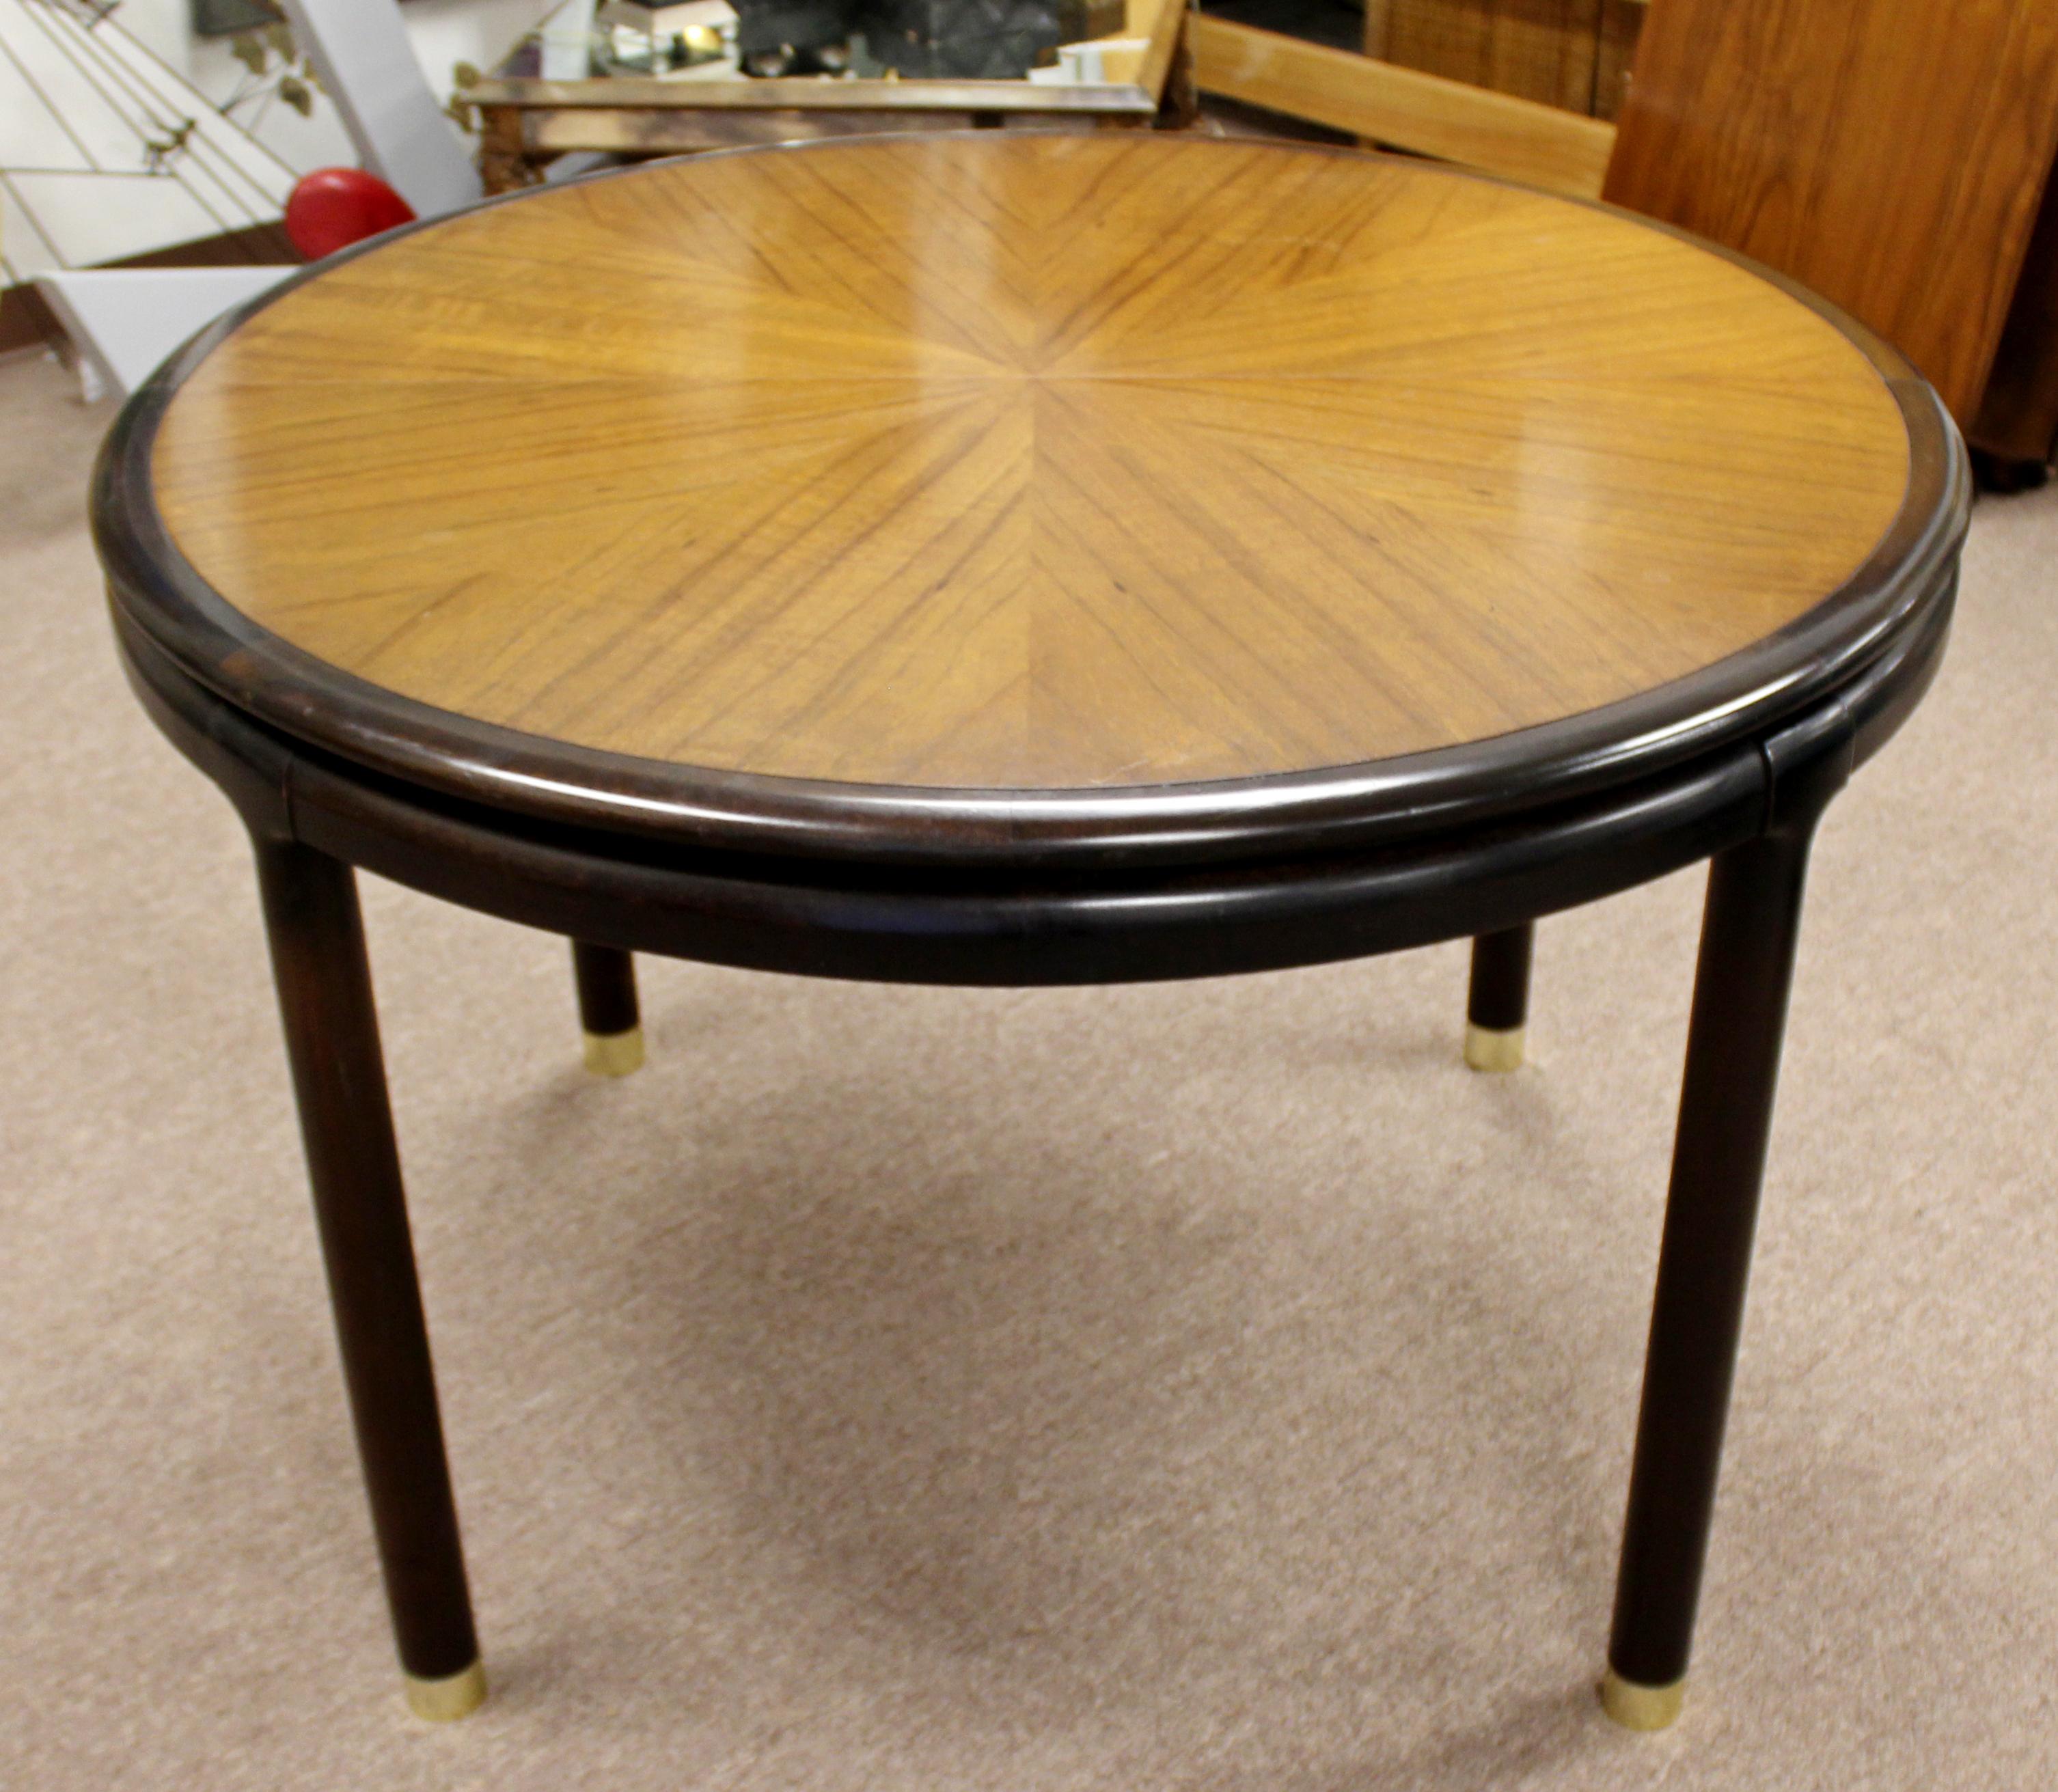 For your consideration is a fantastic rosewood dining or dinette table, with two leaves, attributed to Baker or Dunbar, circa 1960s. In very good vintage condition. The dimensions of the table are 44